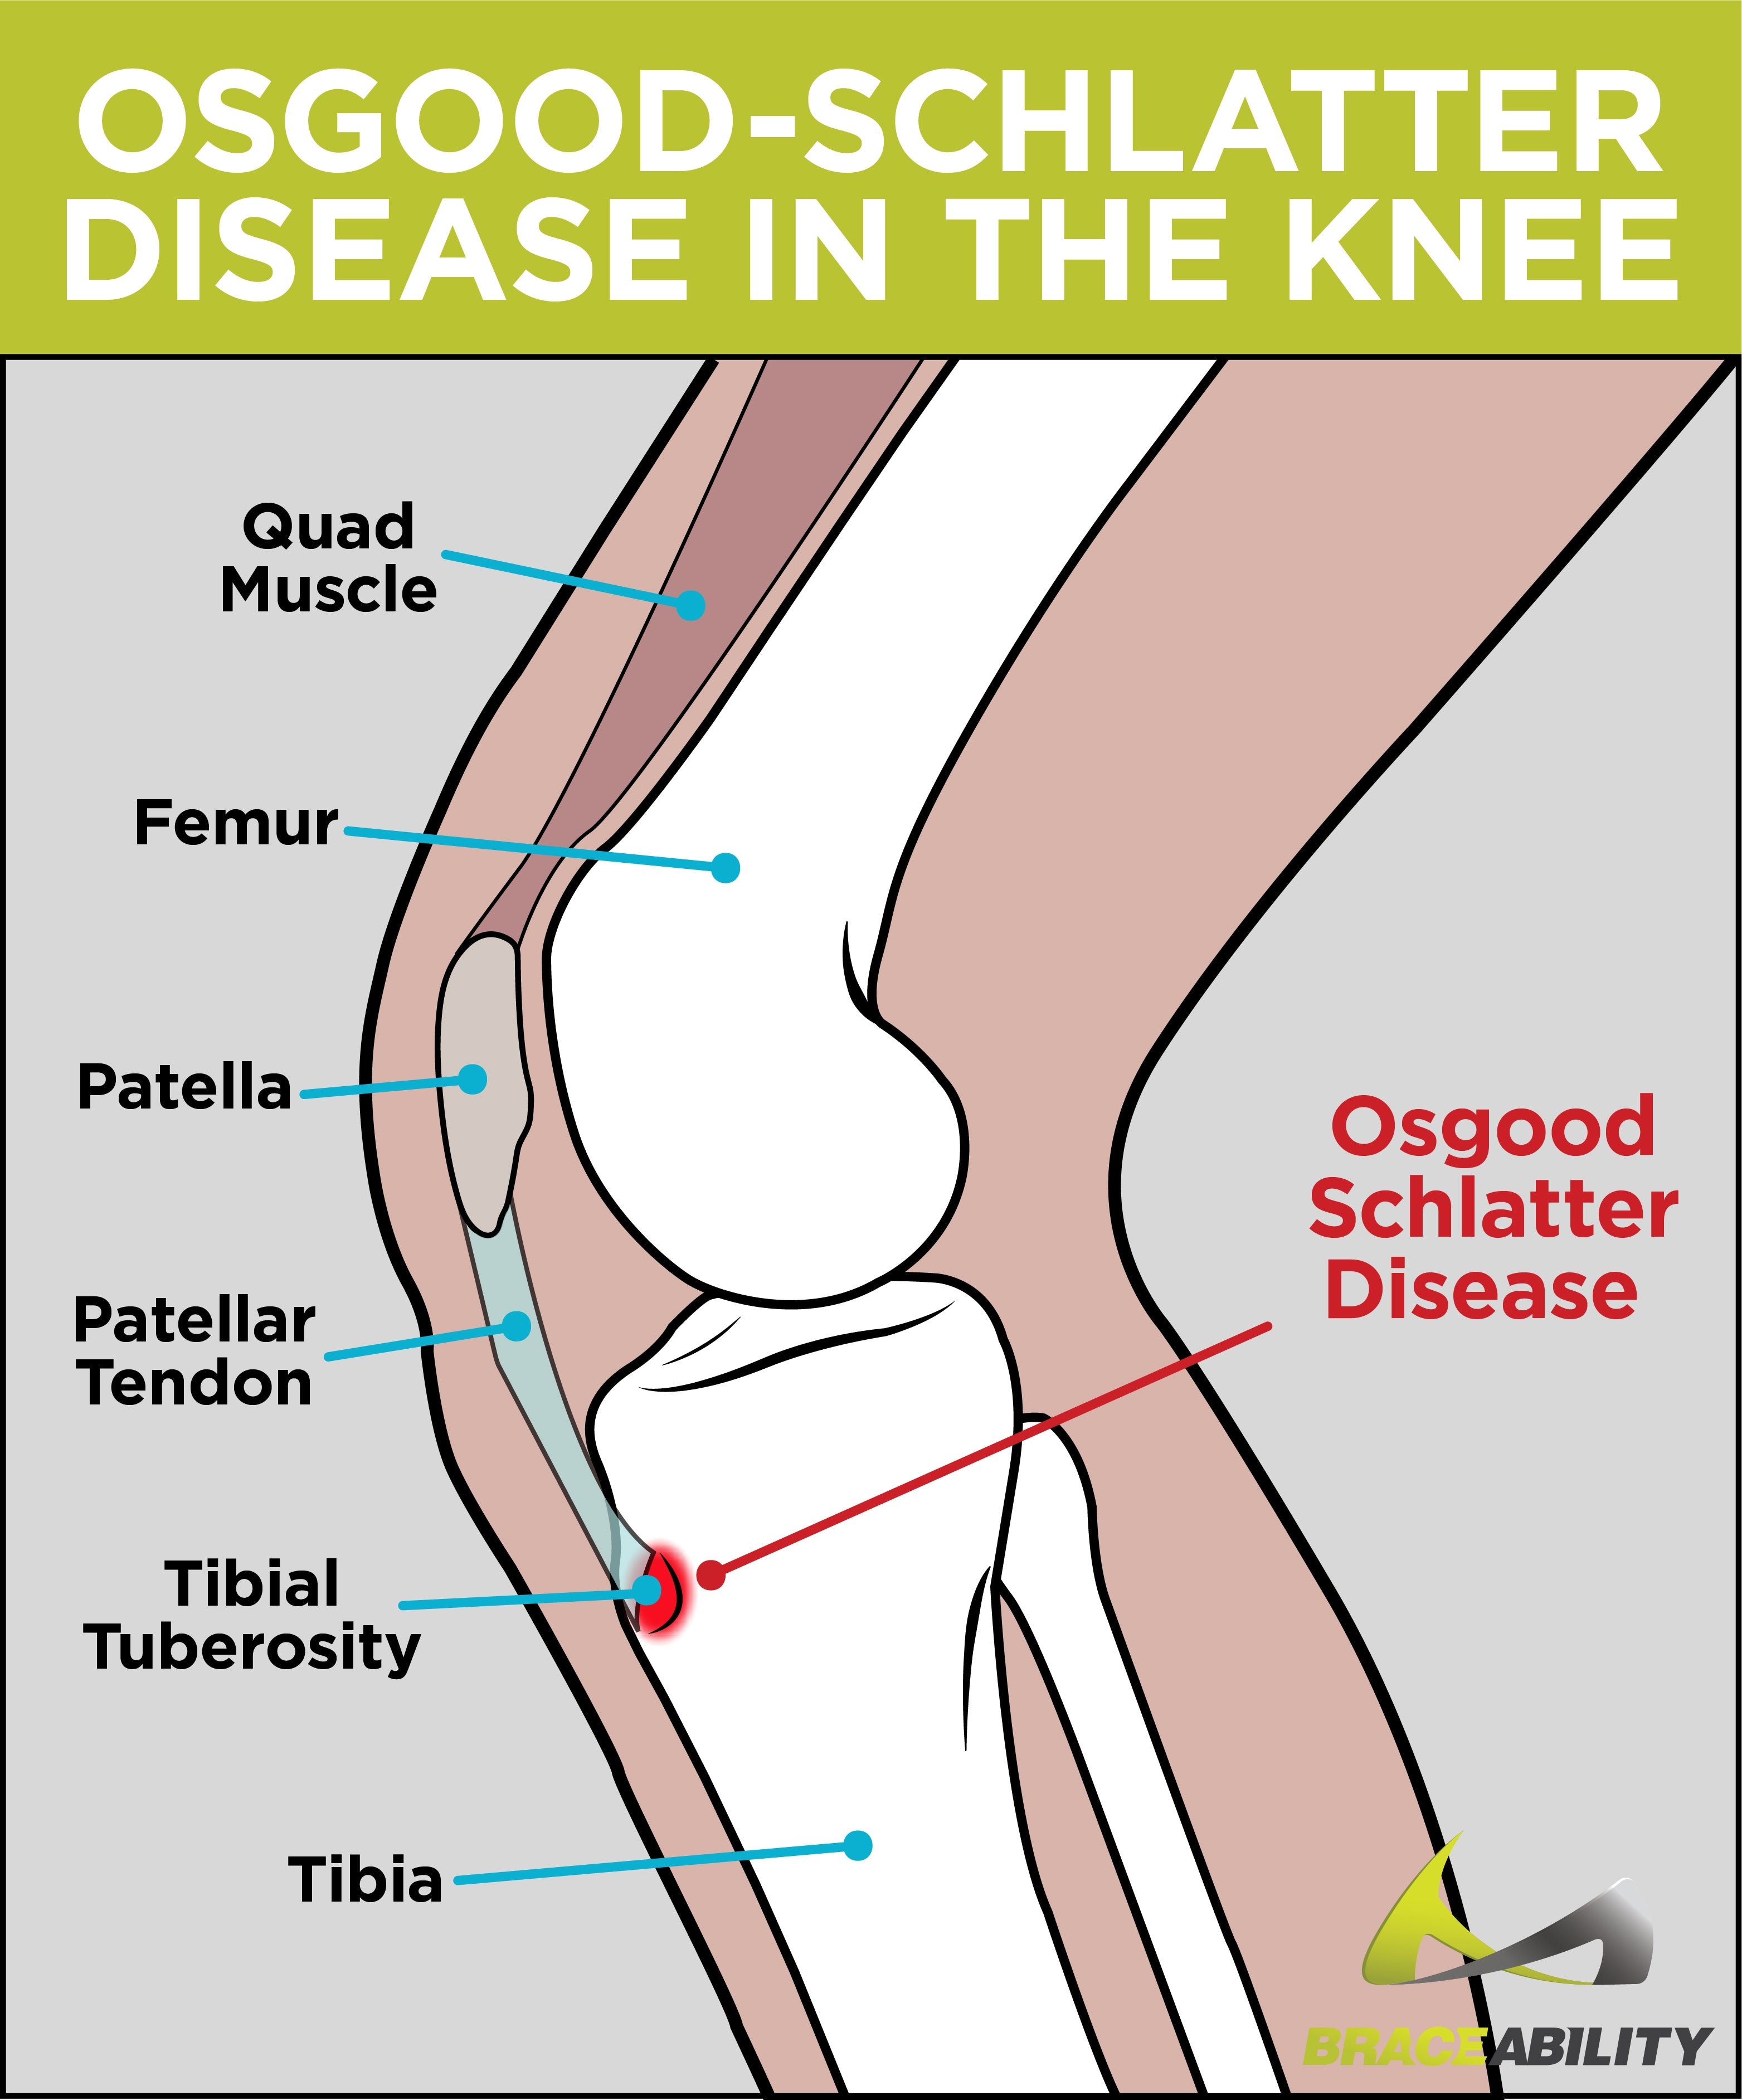 learn about osgood schlatter disease in the knee and affected demographics